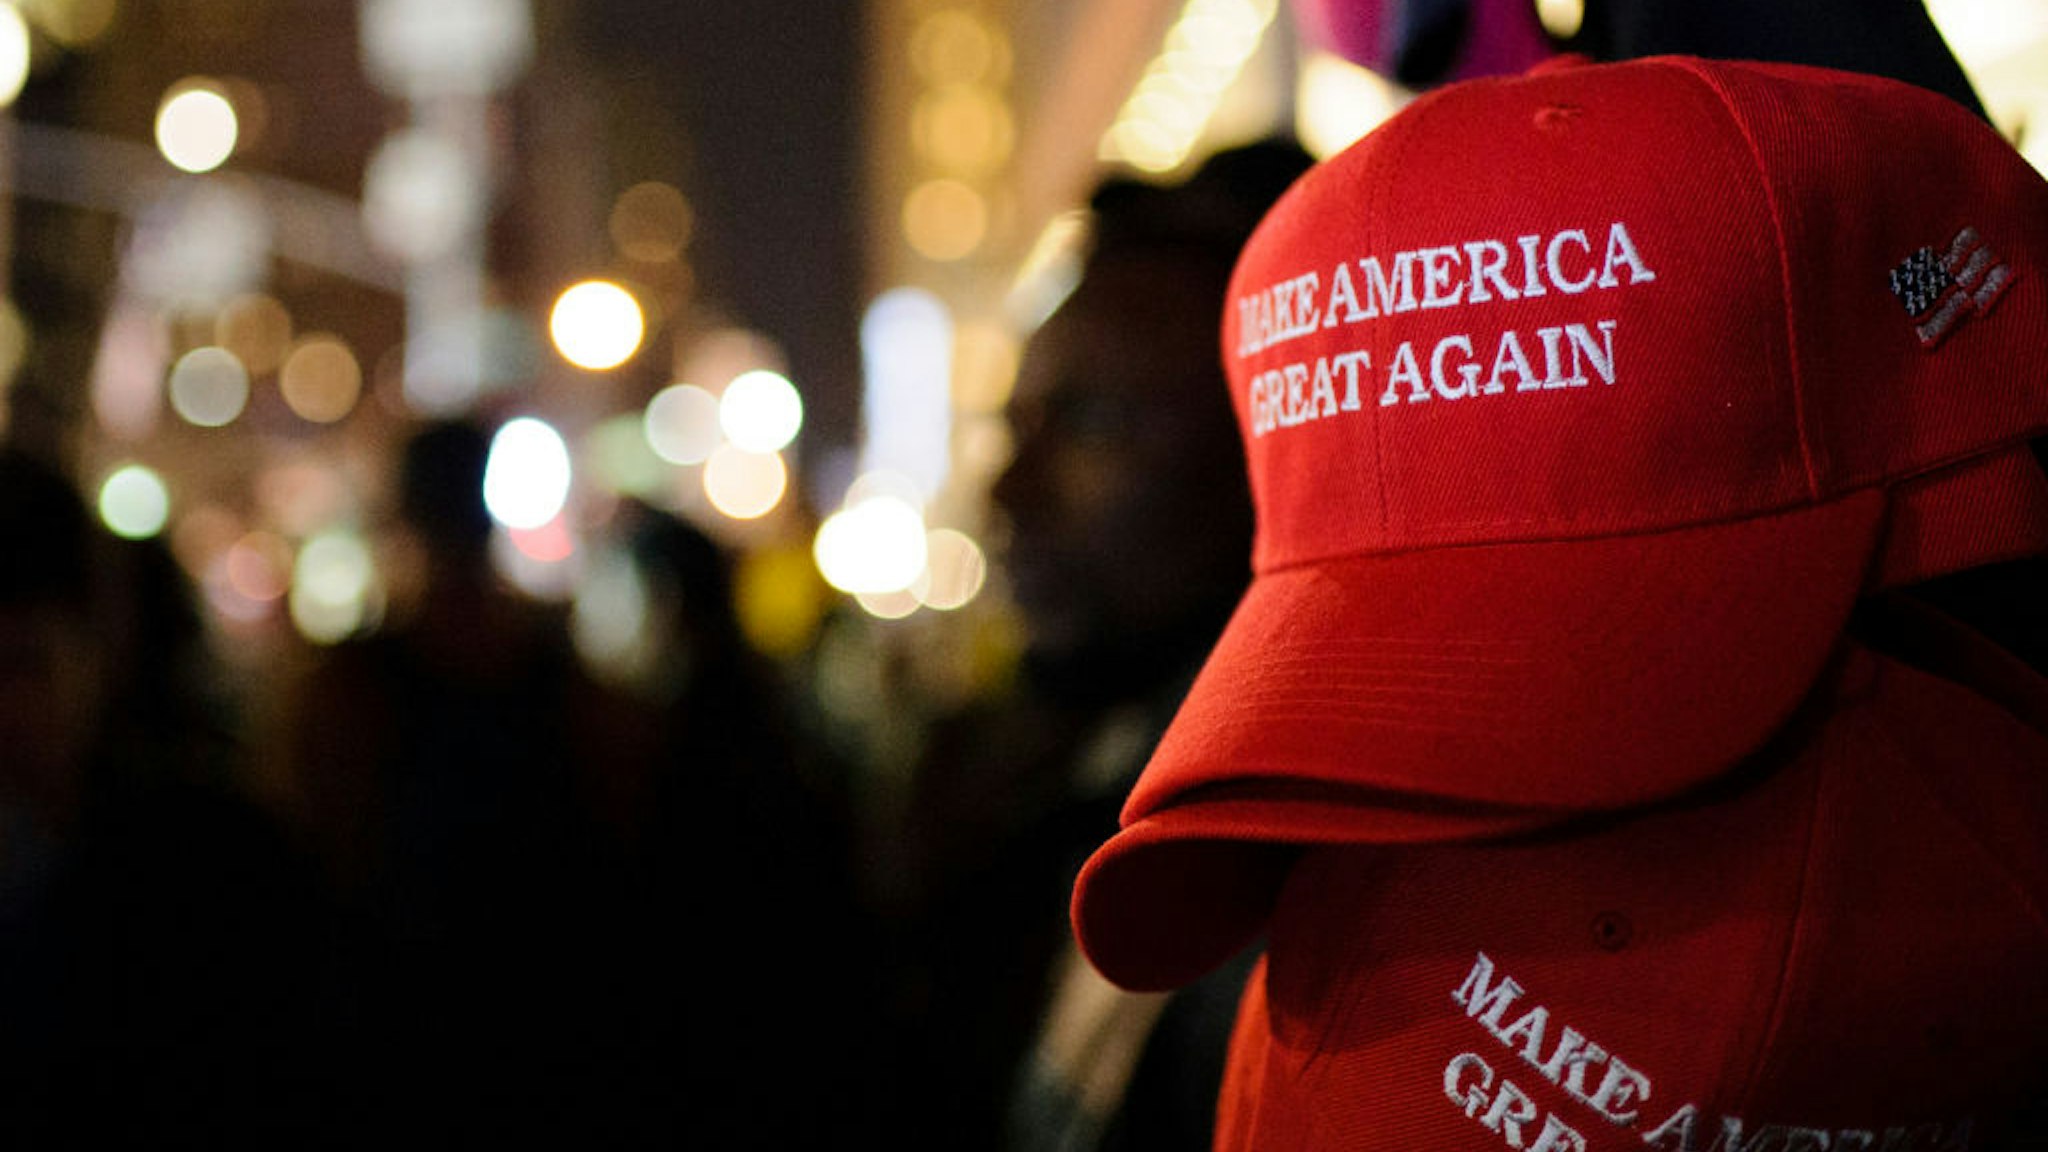 MANHATTAN, NEW YORK CITY, NEW YORK, UNITED STATES - 2016/11/09: "Make America Great Again" red baseball caps, signature headwear of the Donald Trump campaign and its supporters, stand on sale on 6th Avenue in Midtown Manhattan in the second hour after Election Day as election results point to a shock Trump win.